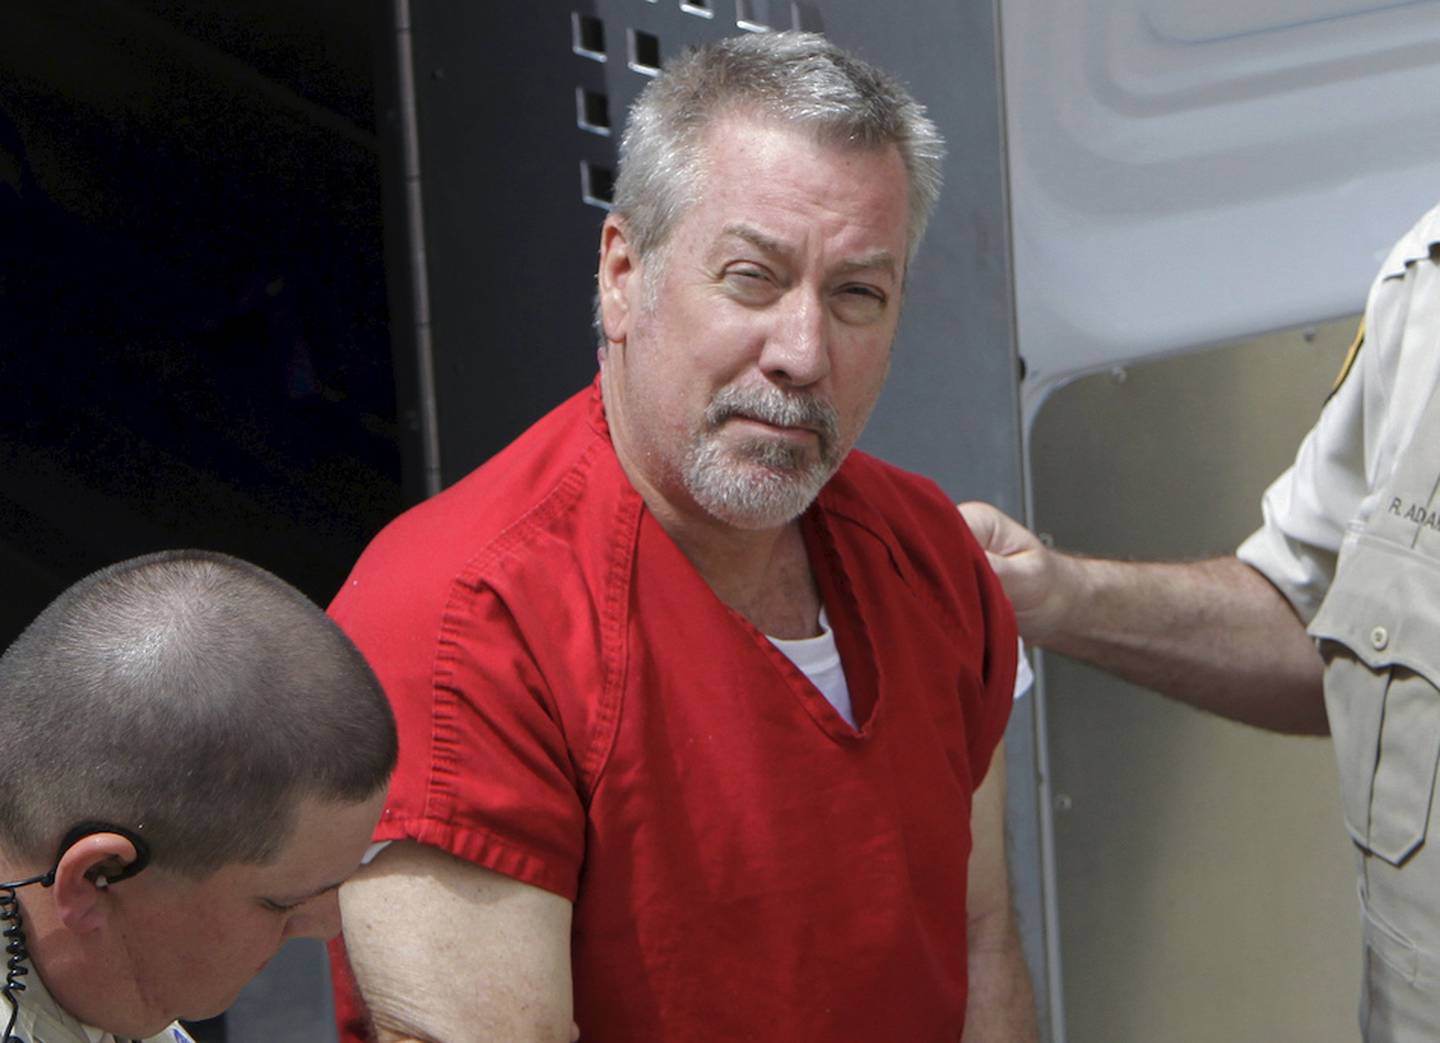 In this May 8, 2009 file photo, former Bolingbrook police officer Drew Peterson arrives for court in Joliet. Peterson is serving a 38-year sentence for killing Kathleen Savio, and is a suspect in the disappearance of his fourth wife, Stacy Peterson. The Bolingbrook Police Pension Board voted unanimously Wednesday to compel Drew Peterson to provide deposition testimony in a case that will determine whether his pension should be taken away from him.